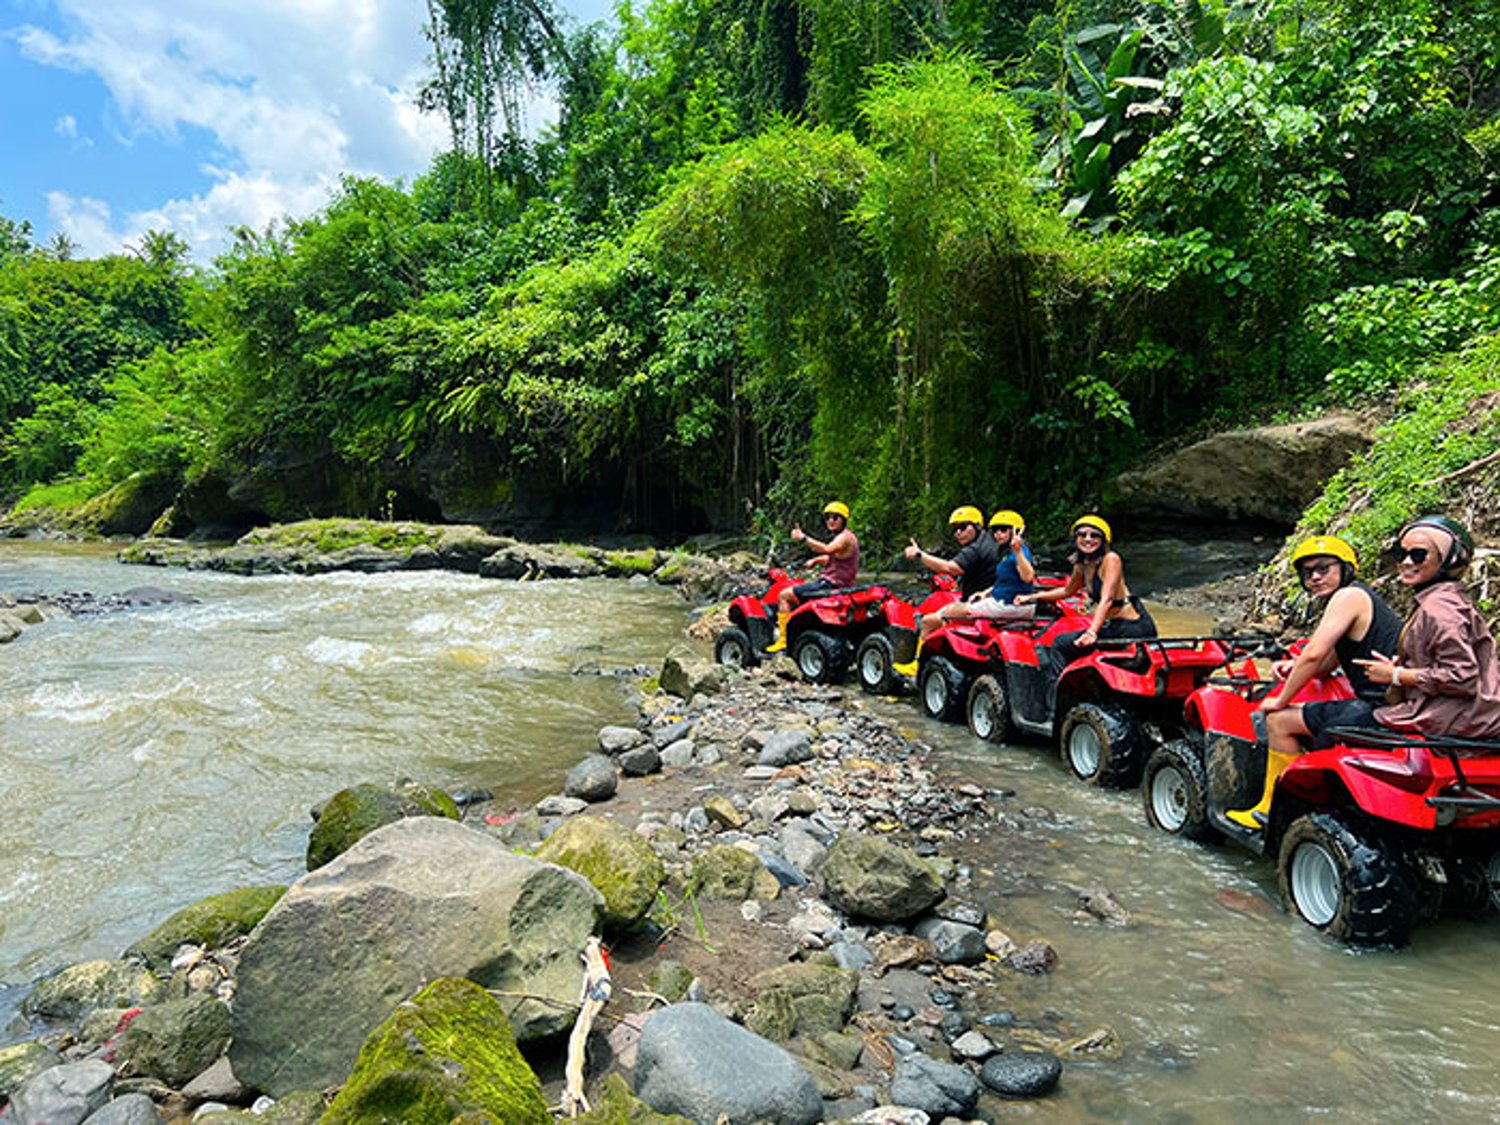 Join Quad Bike Riding Adventure in Bali – Only At USD $35